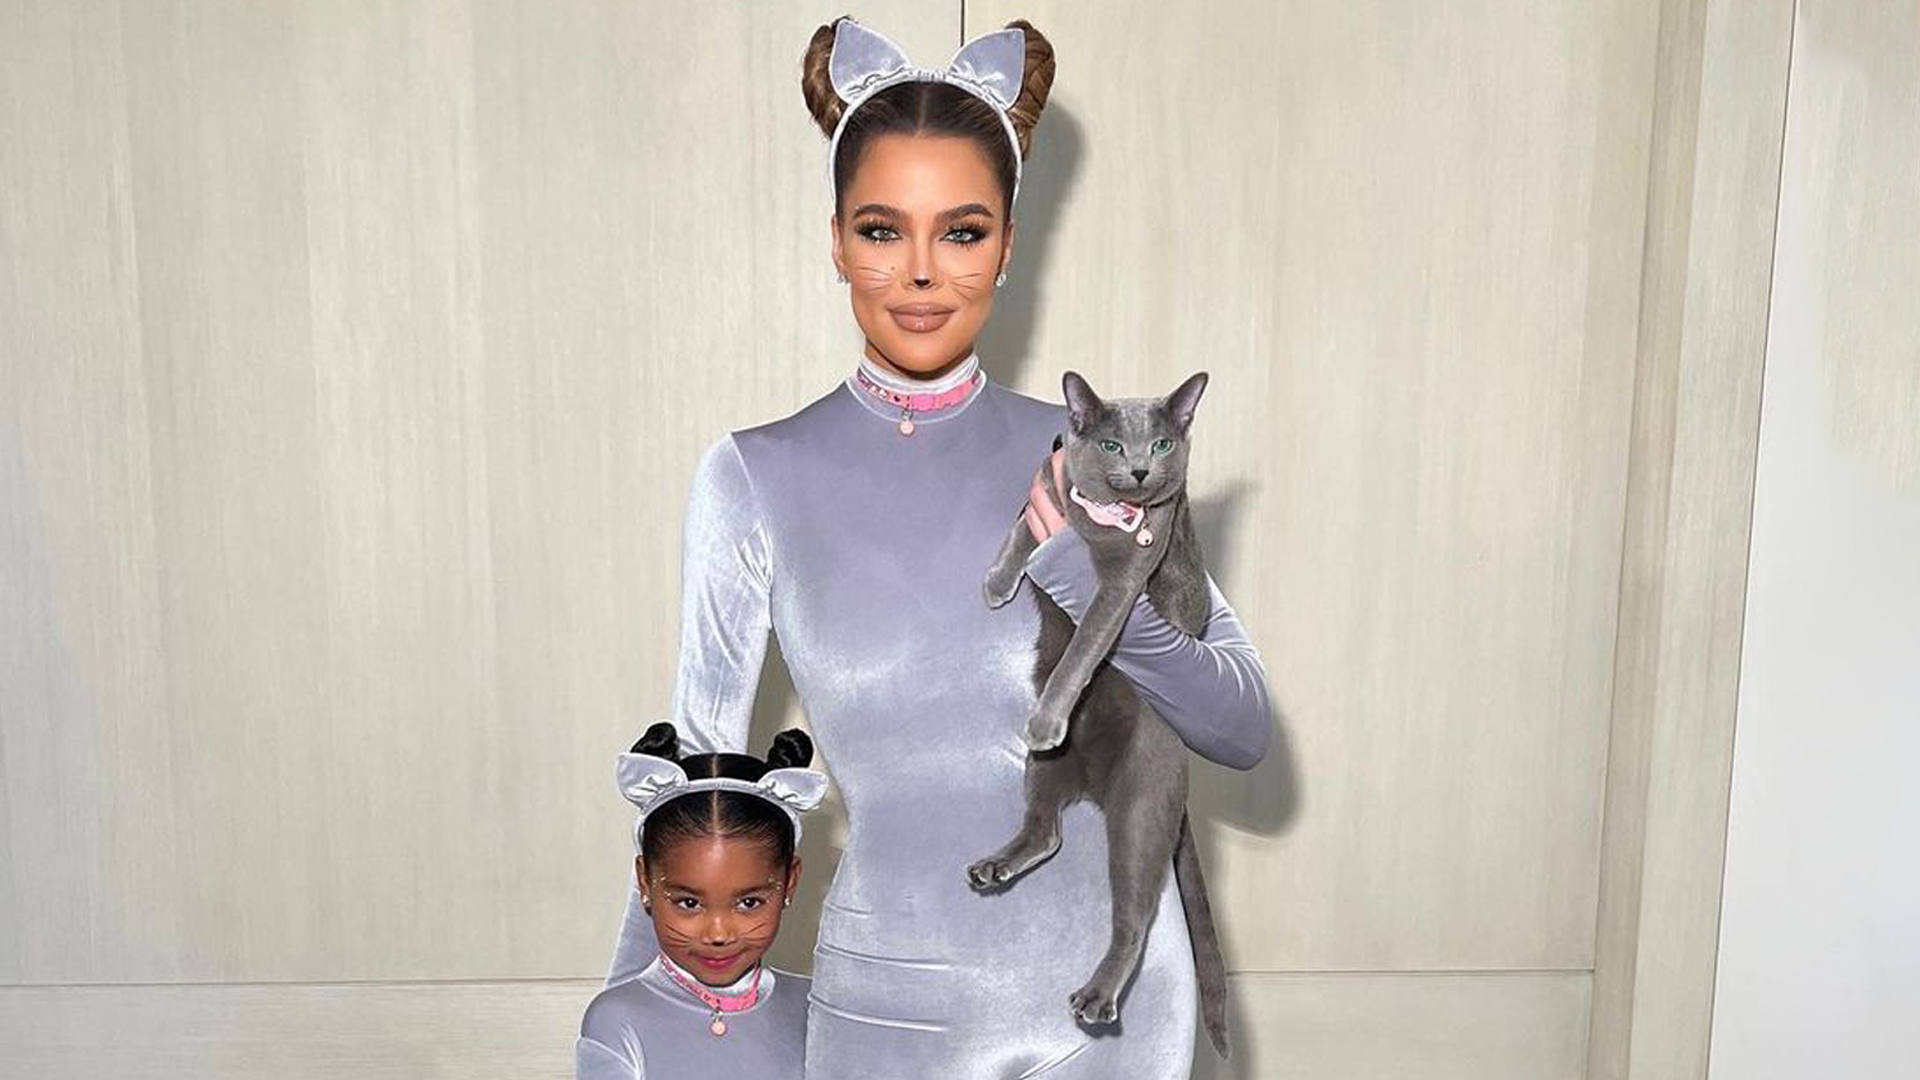 True Kardashian, Khloe Kardashian’s 4-year-old daughter, shows off Grey Kitty’s SKIMS outfit that Kim gifted her.